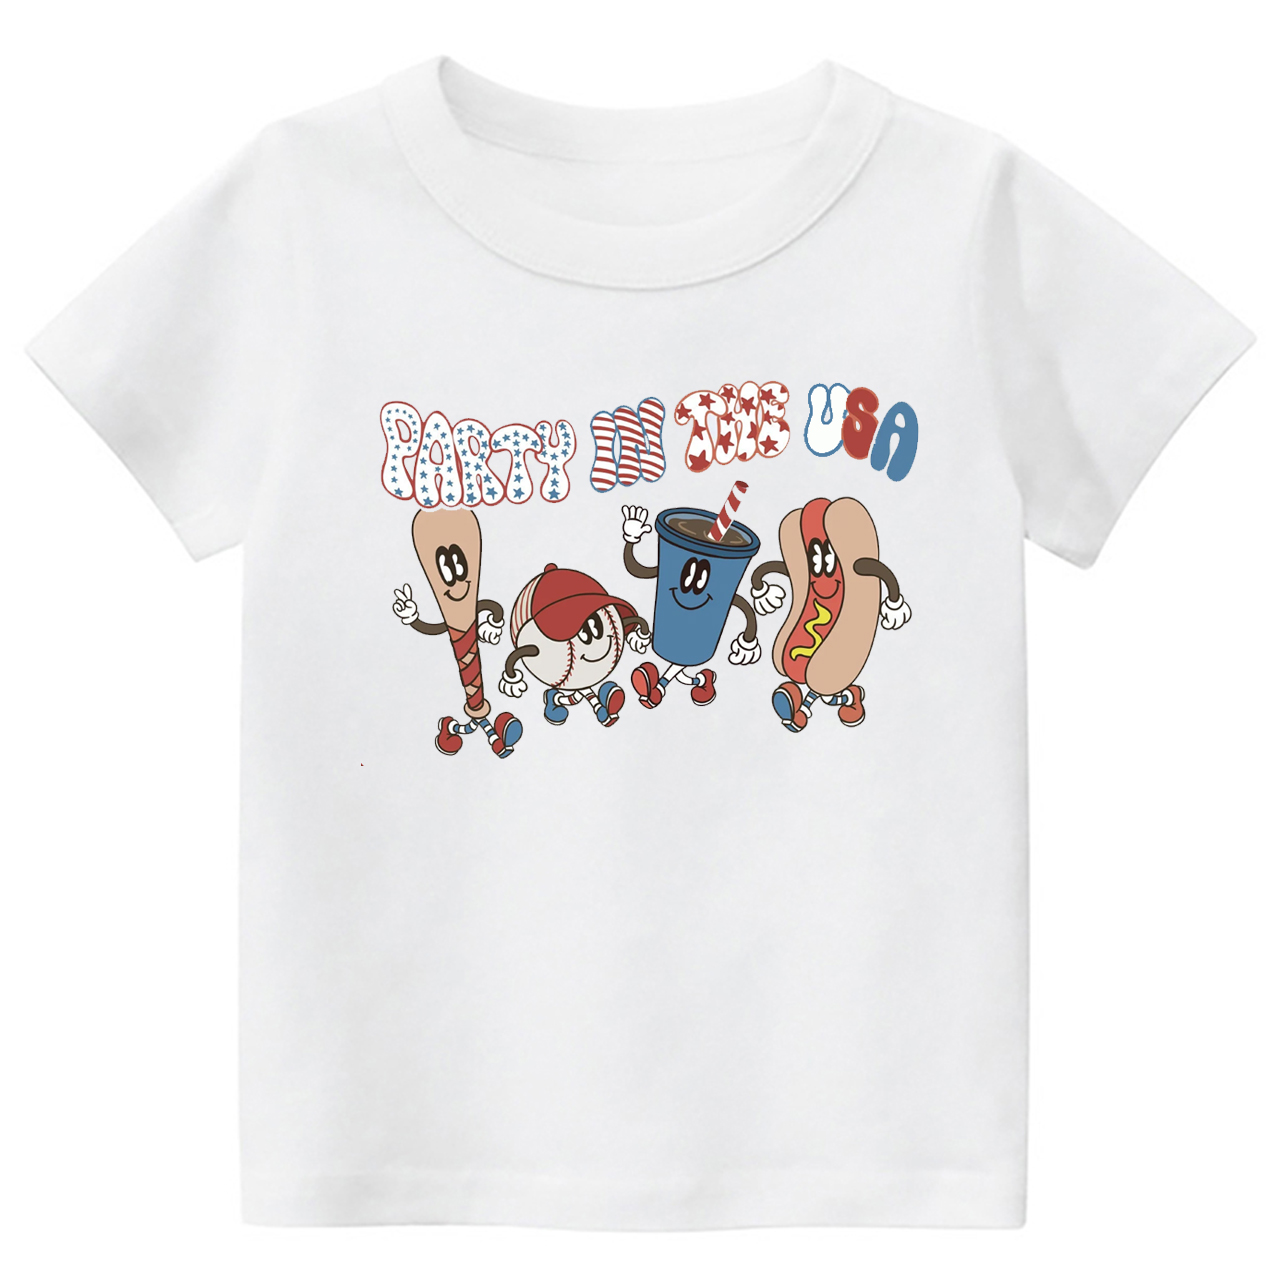 Retro Party In the USA Toddler Shirt